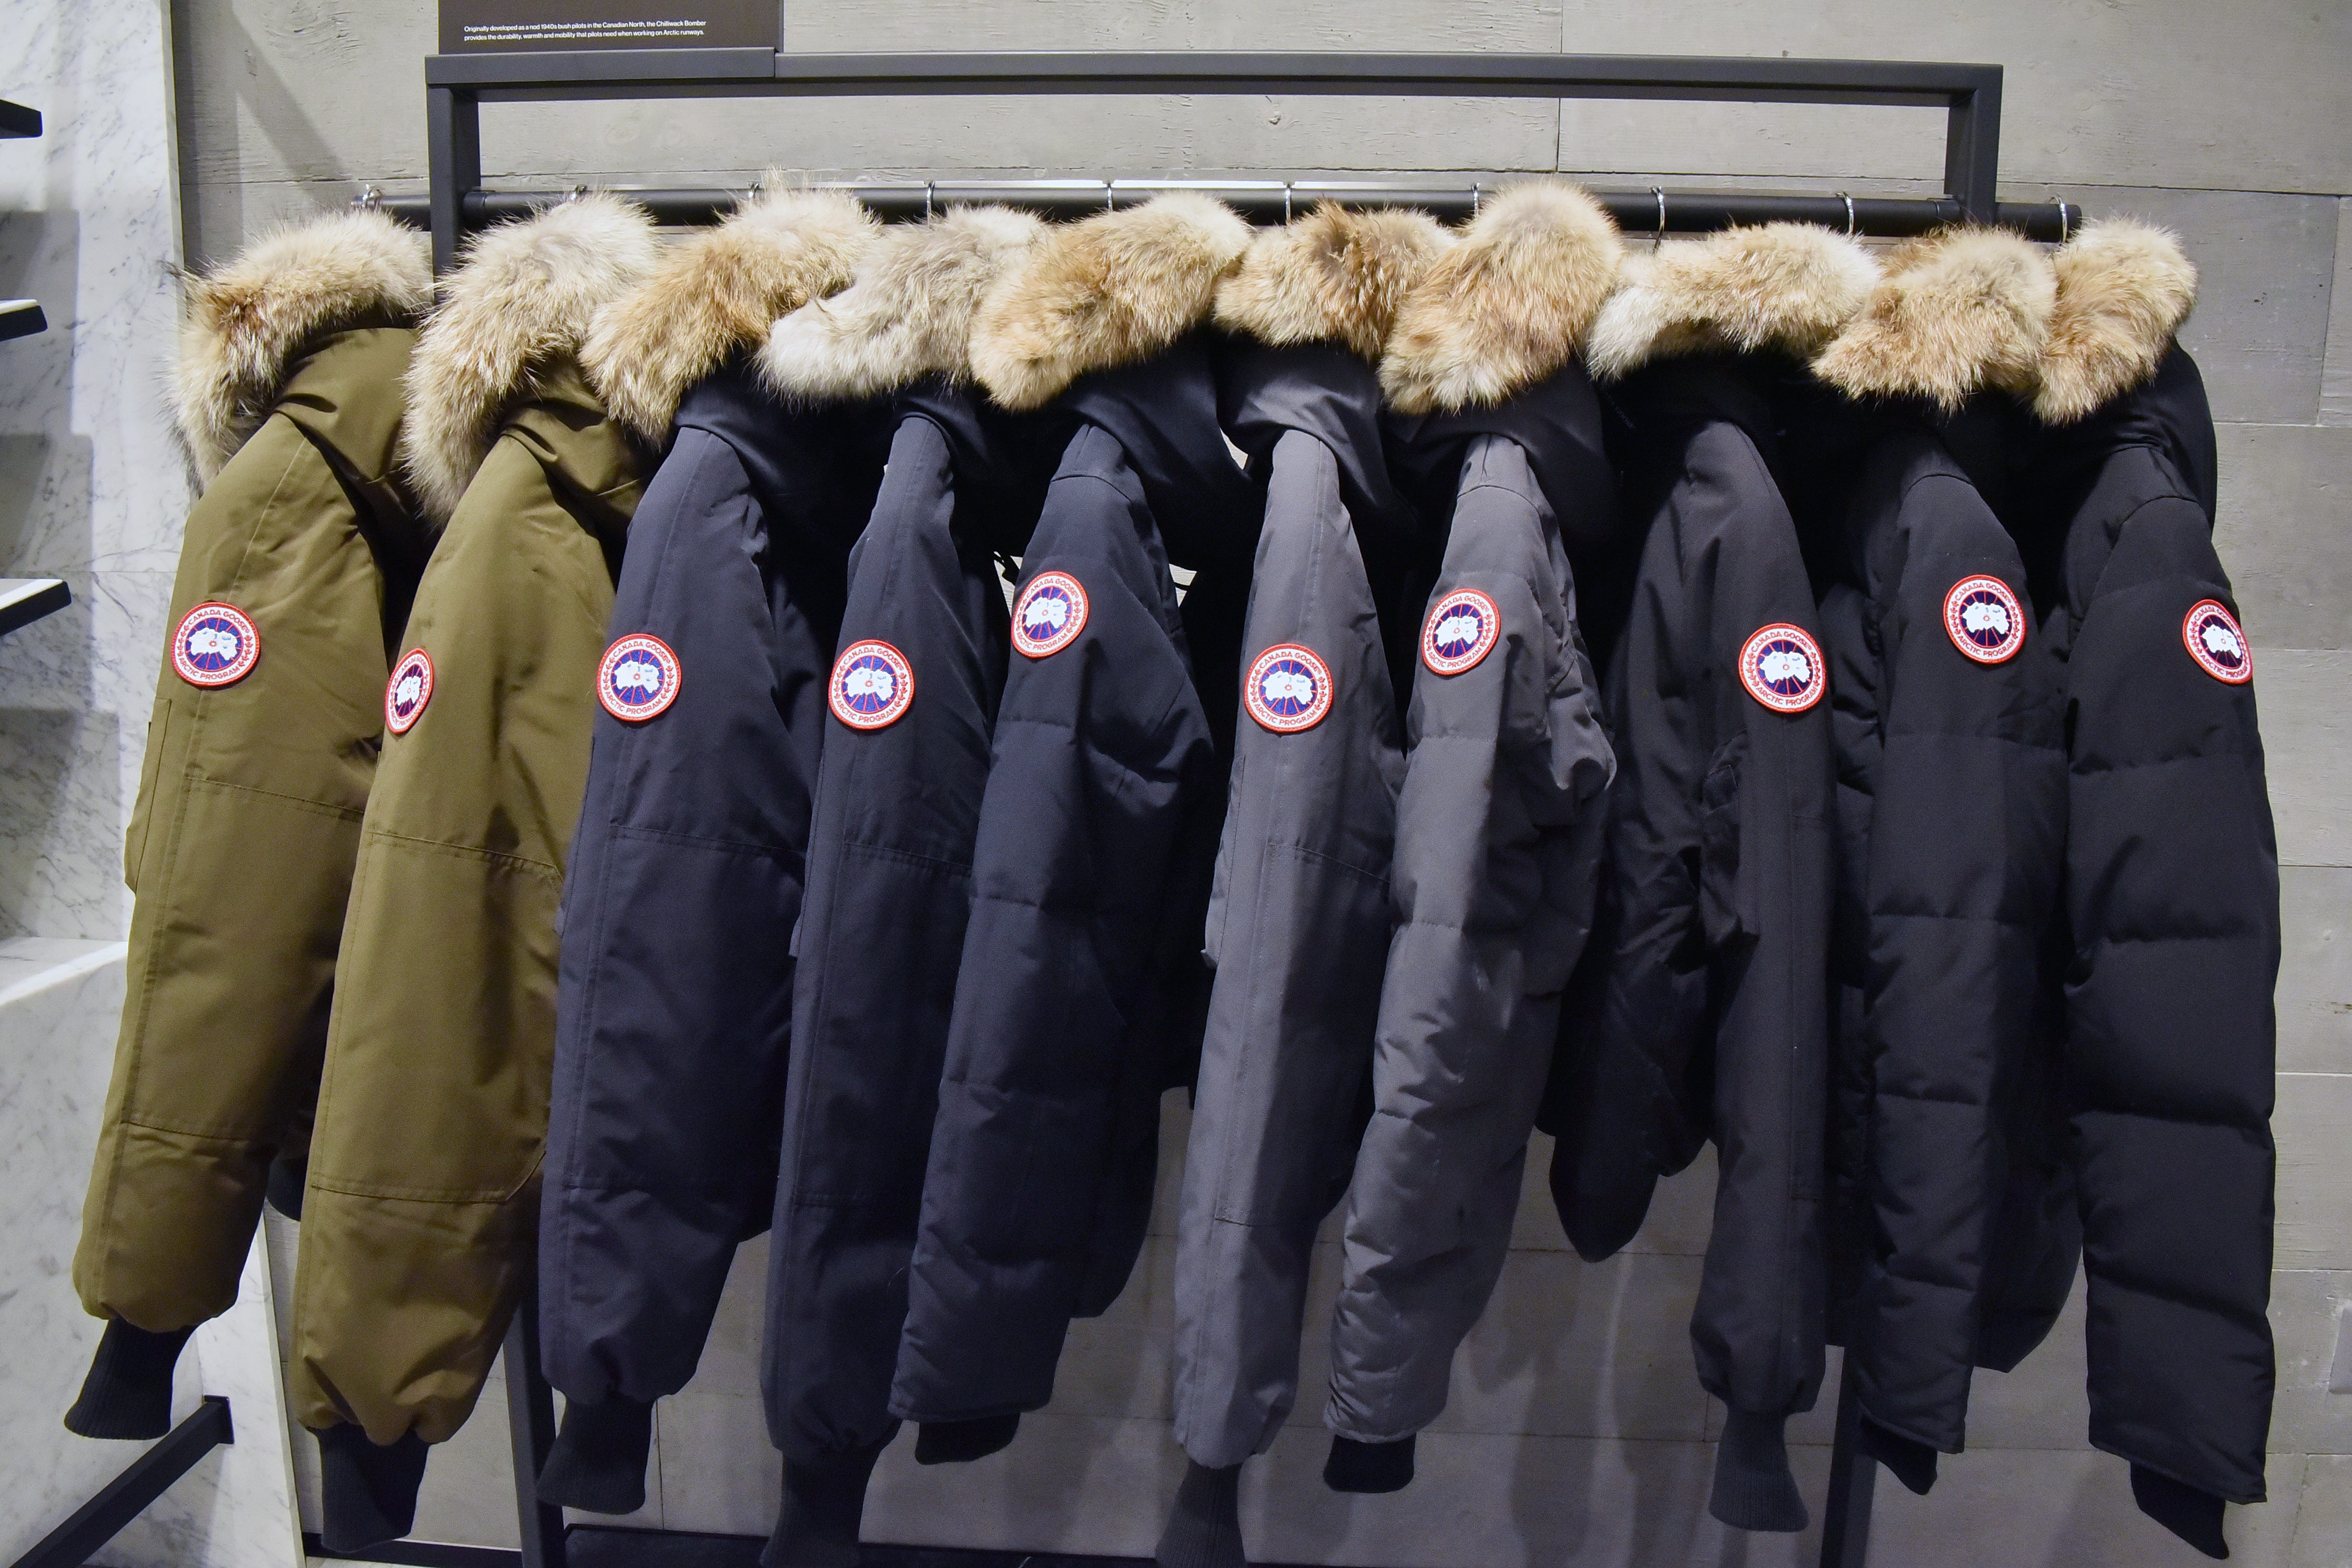 Canada Goose to open first store in NJ at The Mall at Short Hills